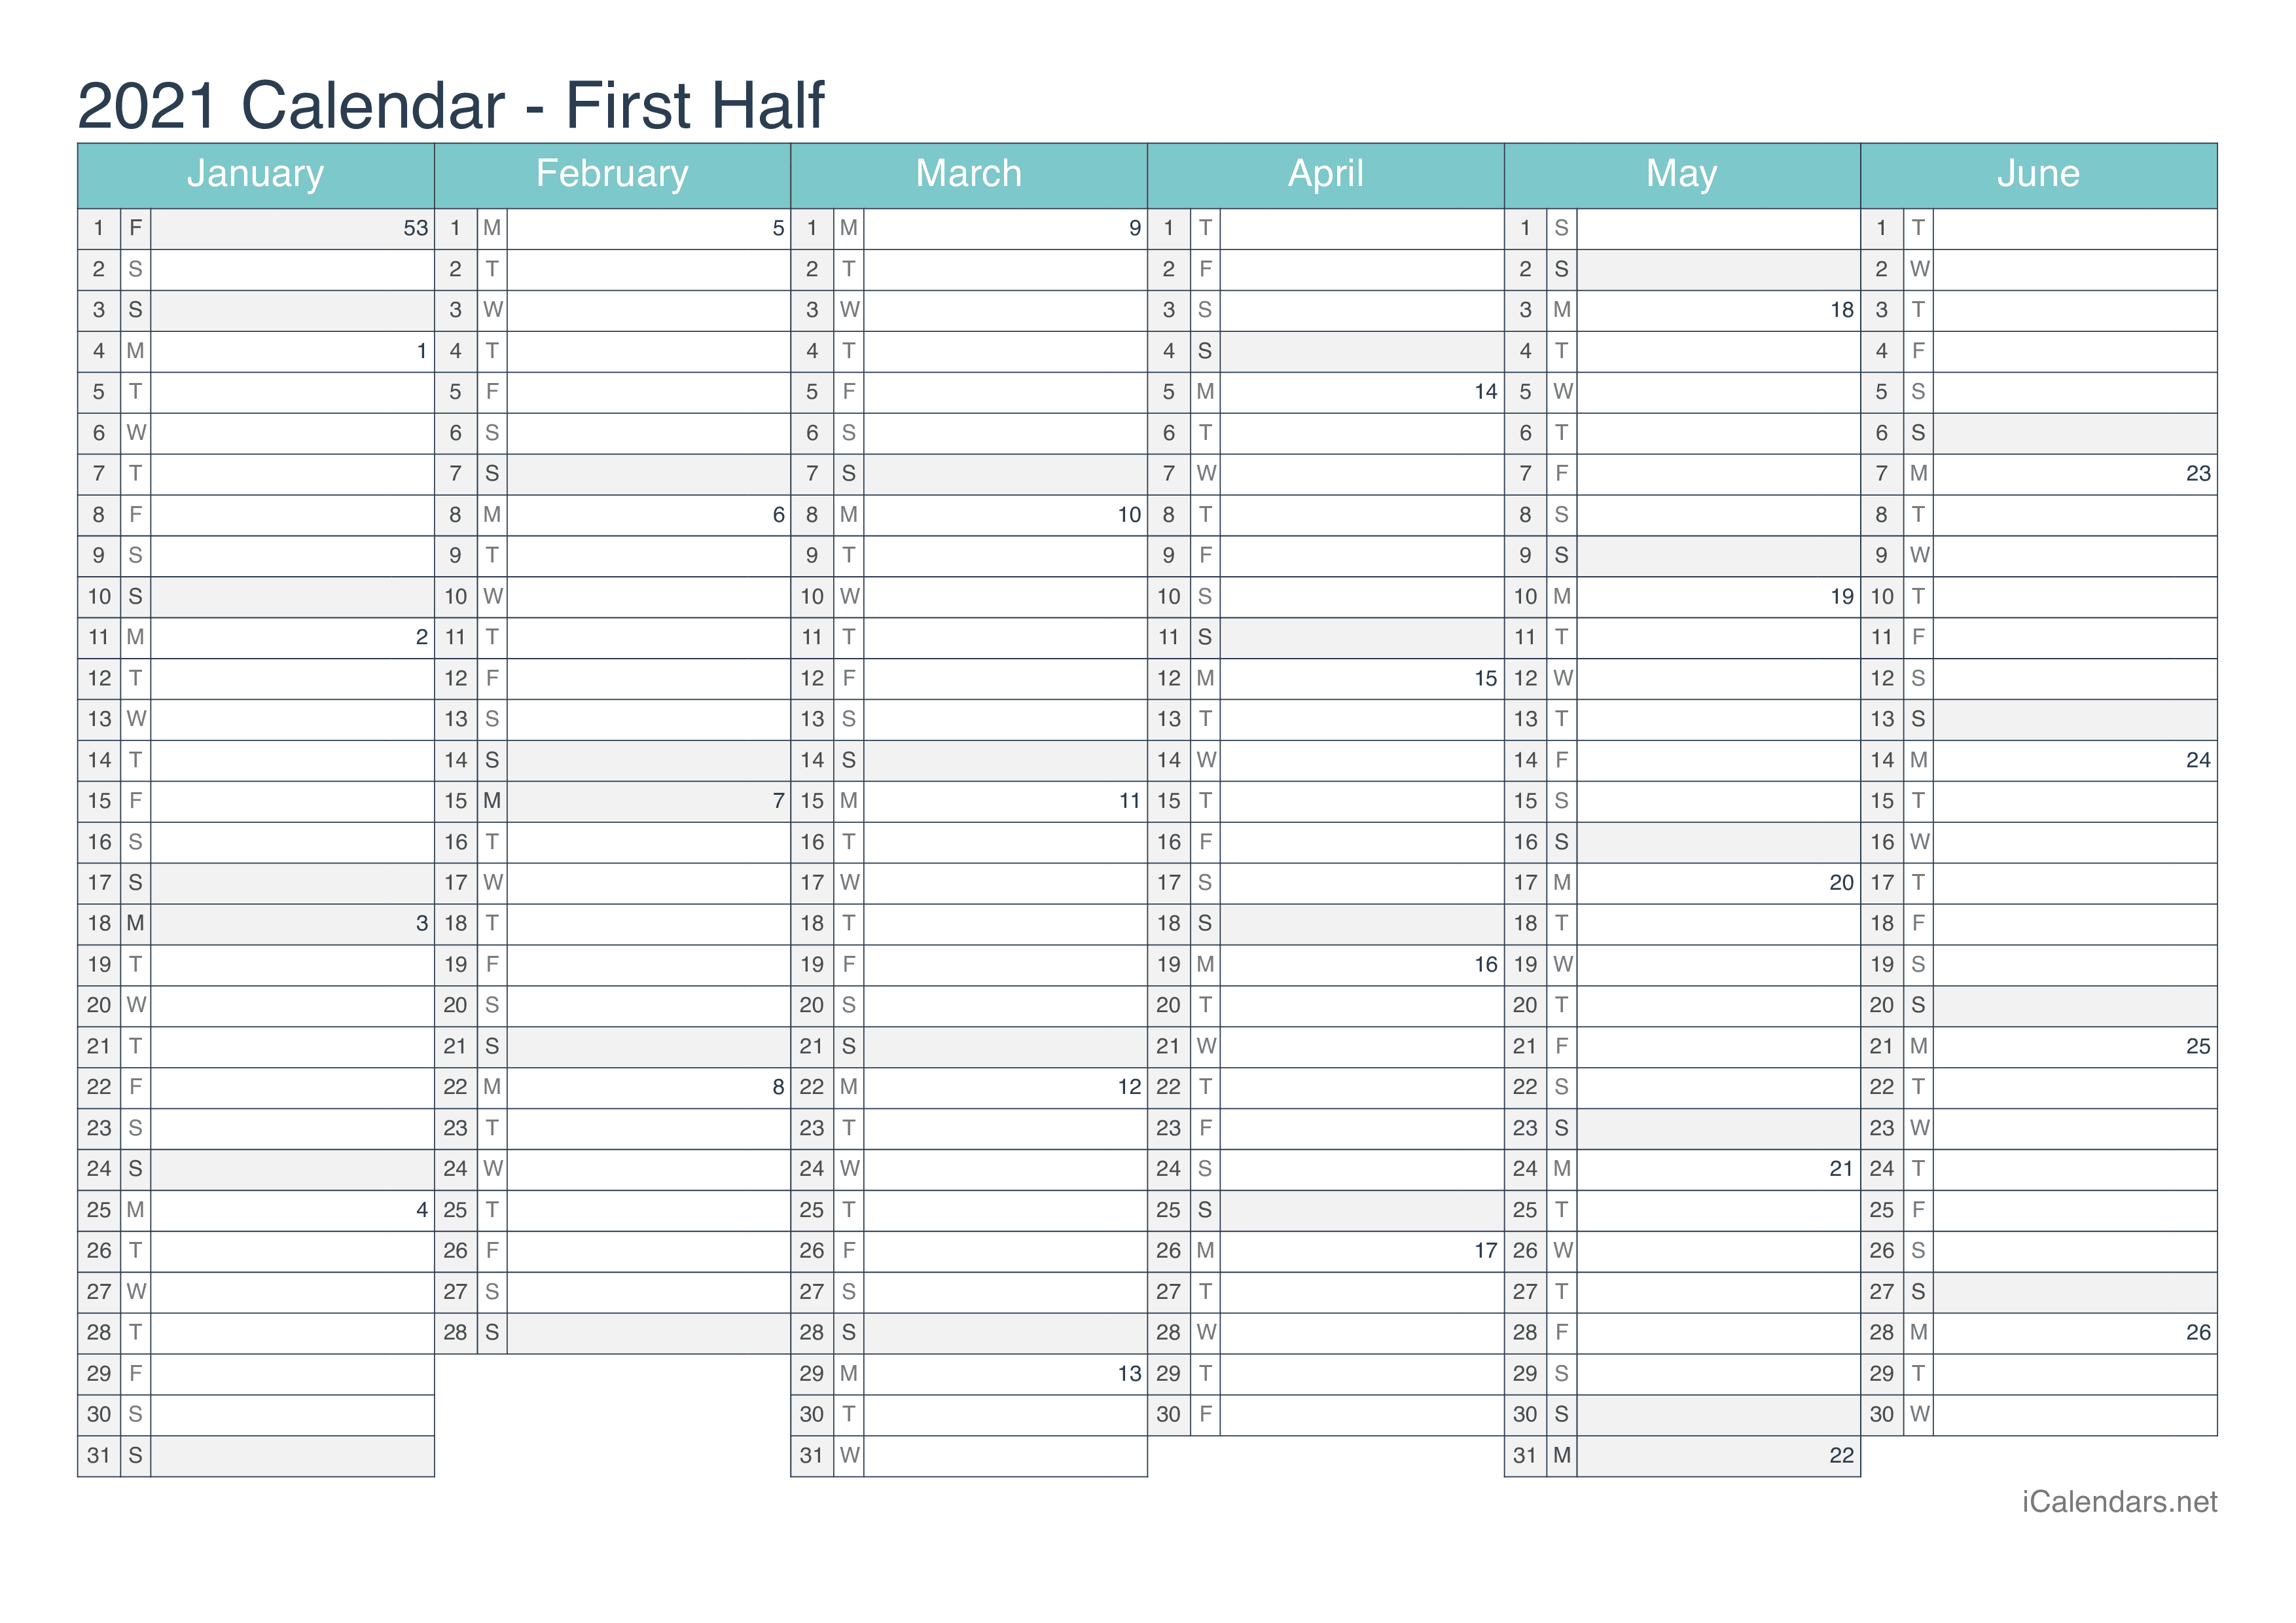 2021 Half year calendar with week numbers - Turquoise